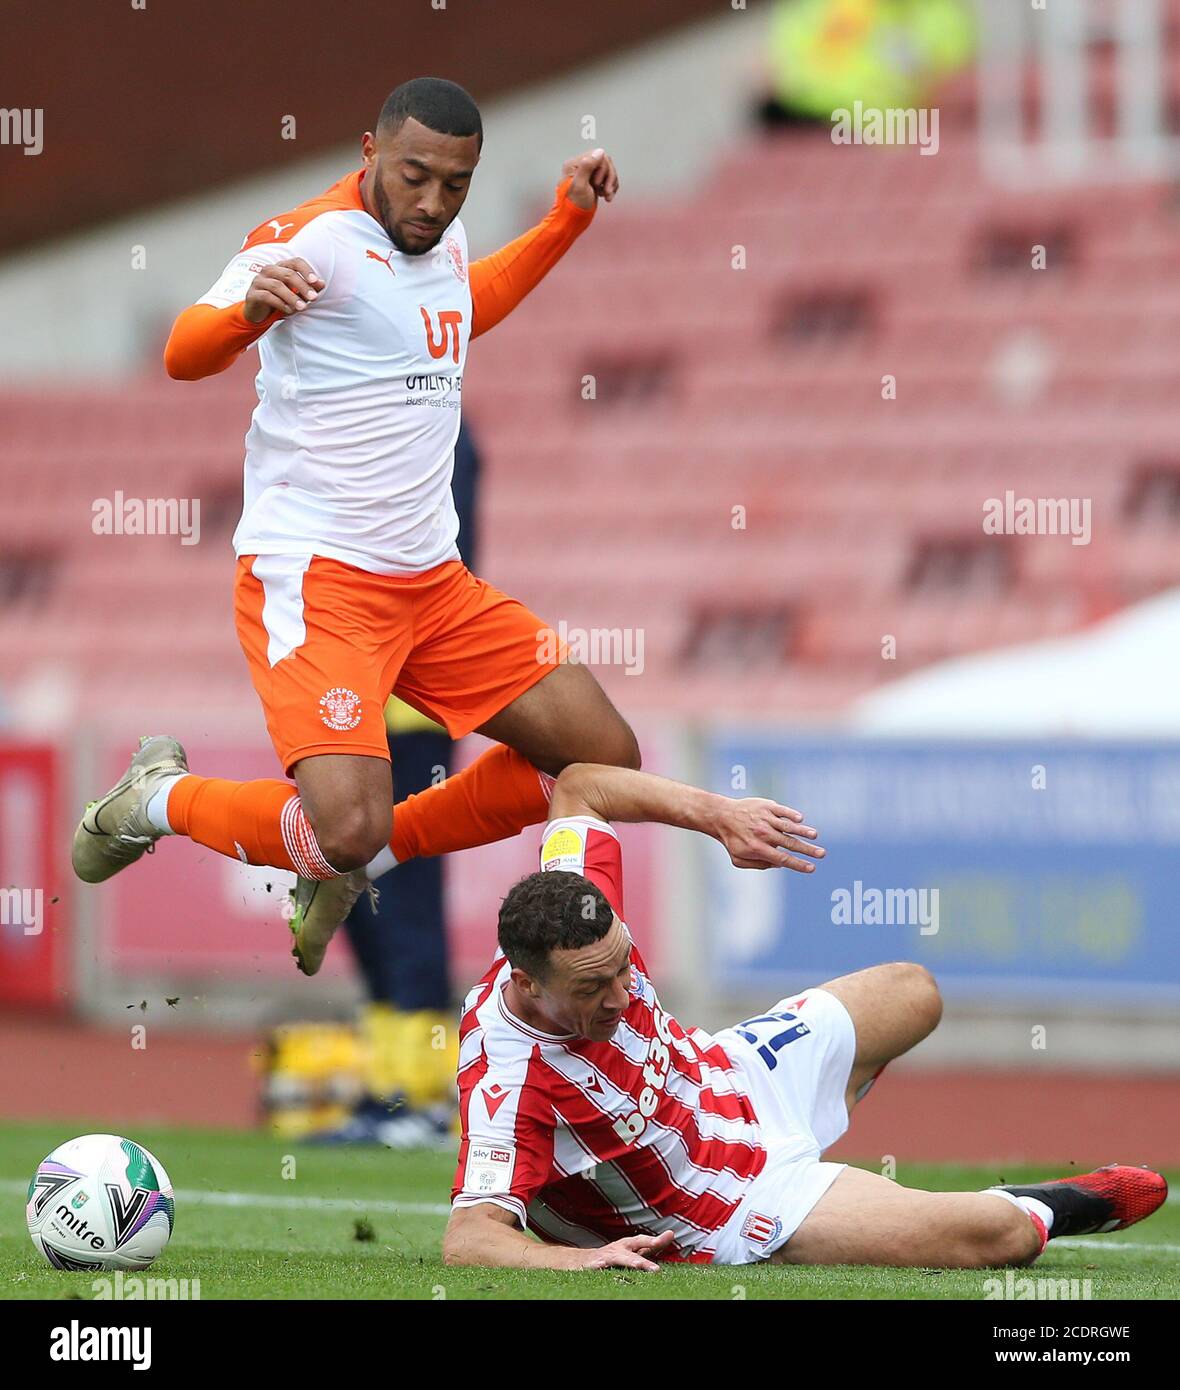 Stoke City's Jordan James Chester and Blackpool's Keshi Anderson during the Carabao Cup match at the bet365 Stadium, Stoke. Stock Photo